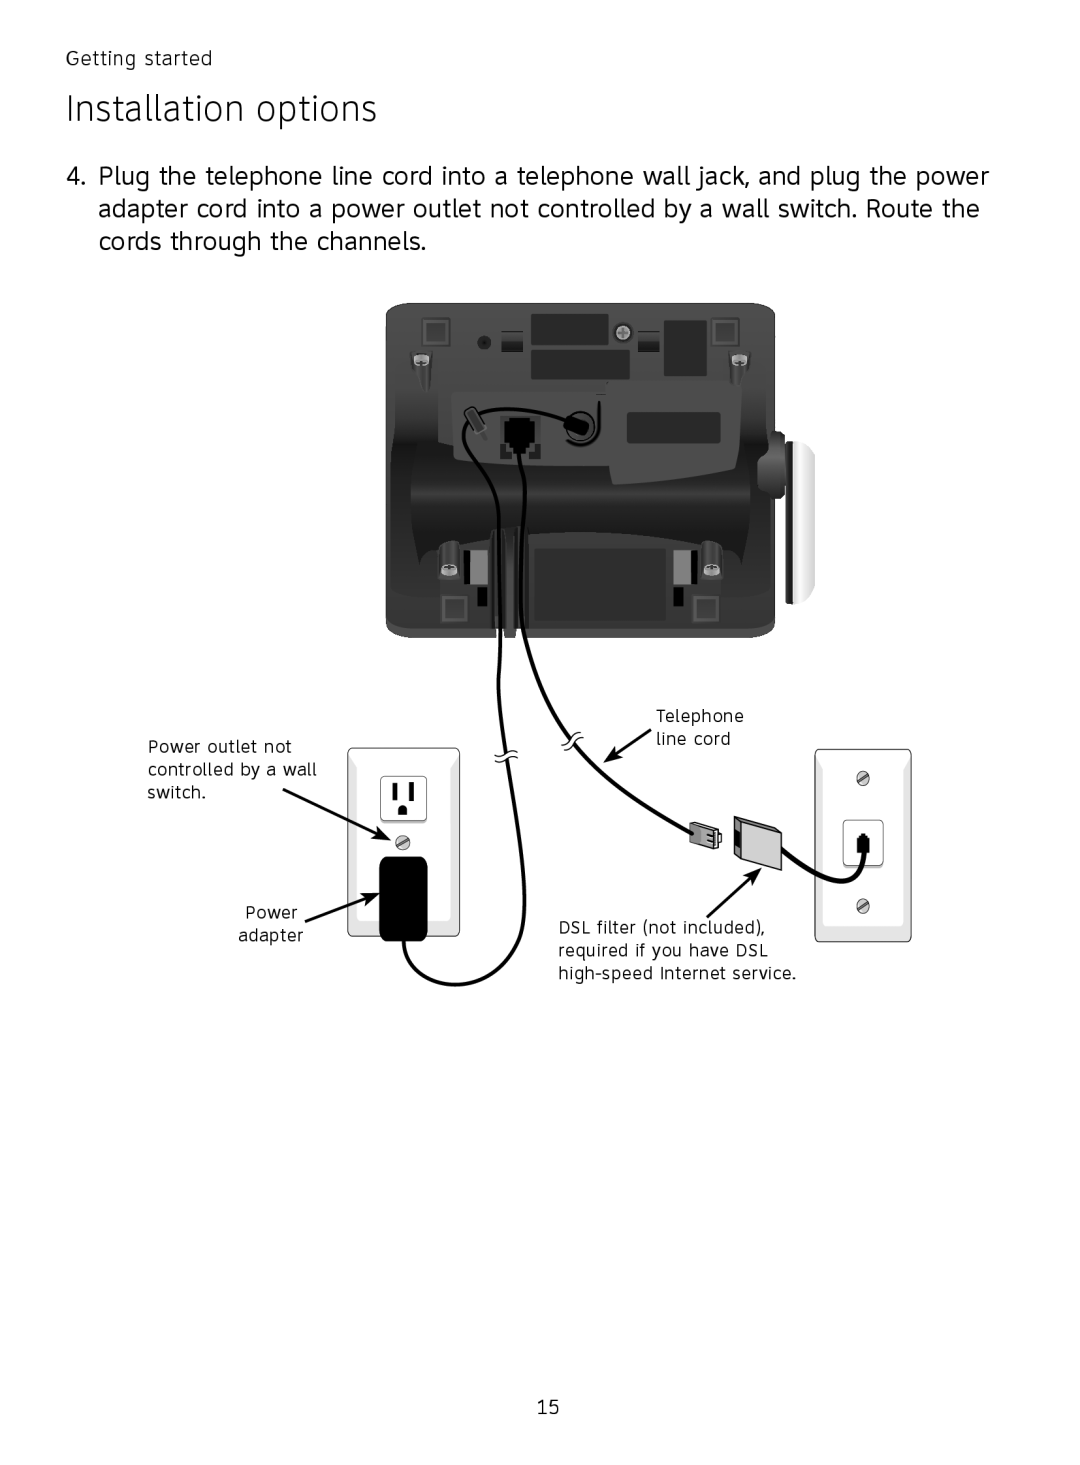 AT&T TL9178, TL91378 Installation options, Power outlet not controlled by a wall switch Power adapter, Telephone line cord 